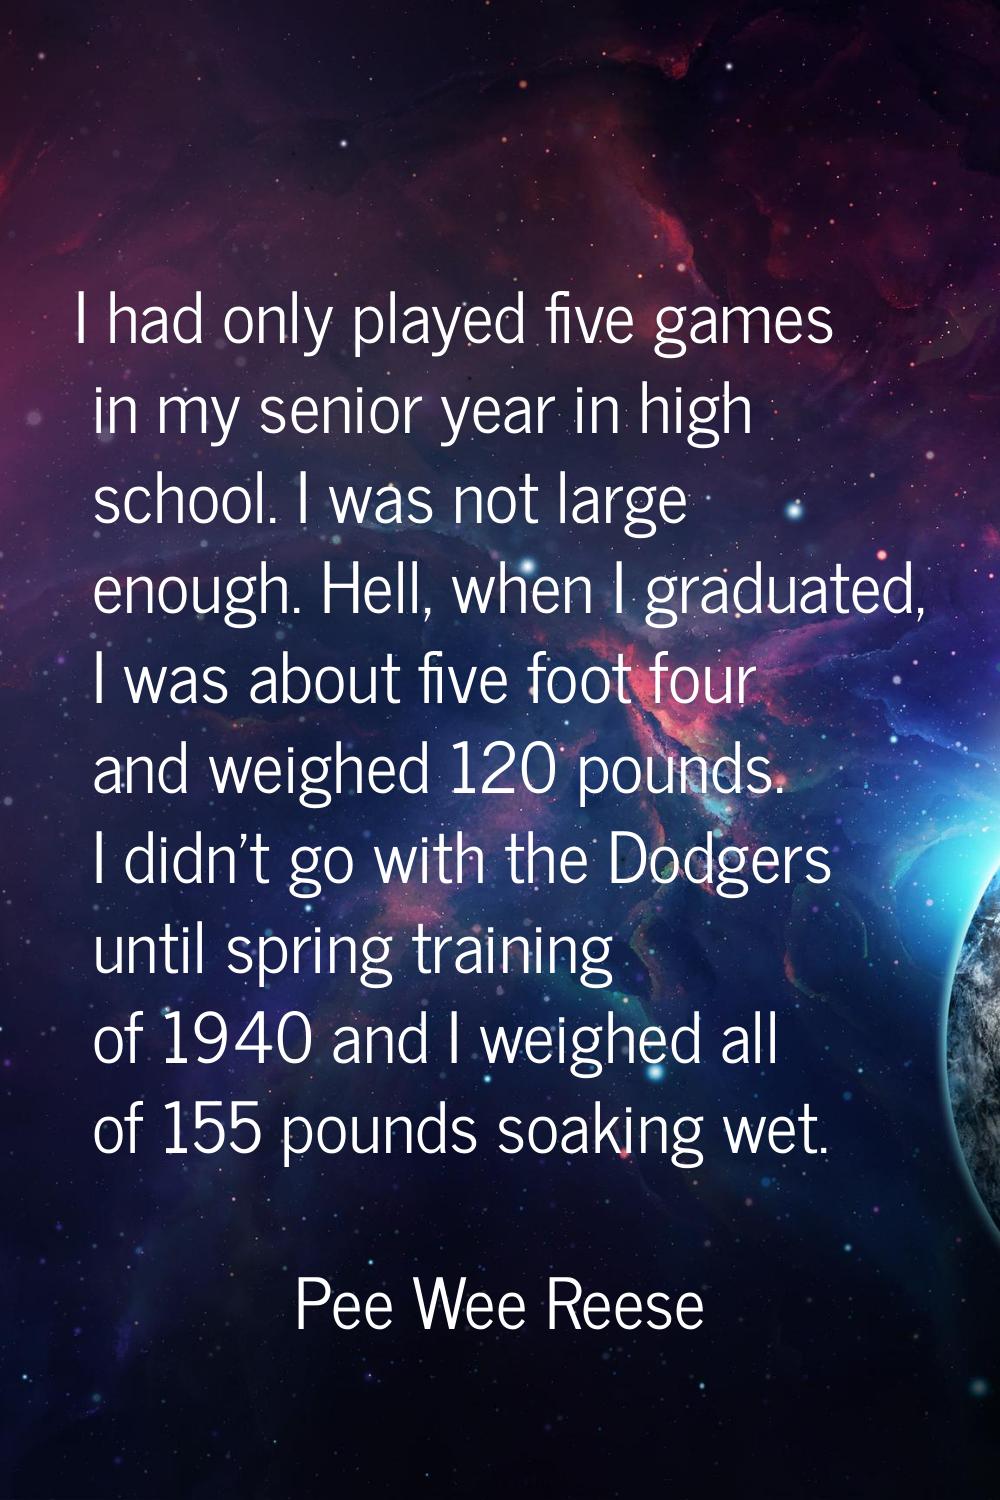 I had only played five games in my senior year in high school. I was not large enough. Hell, when I